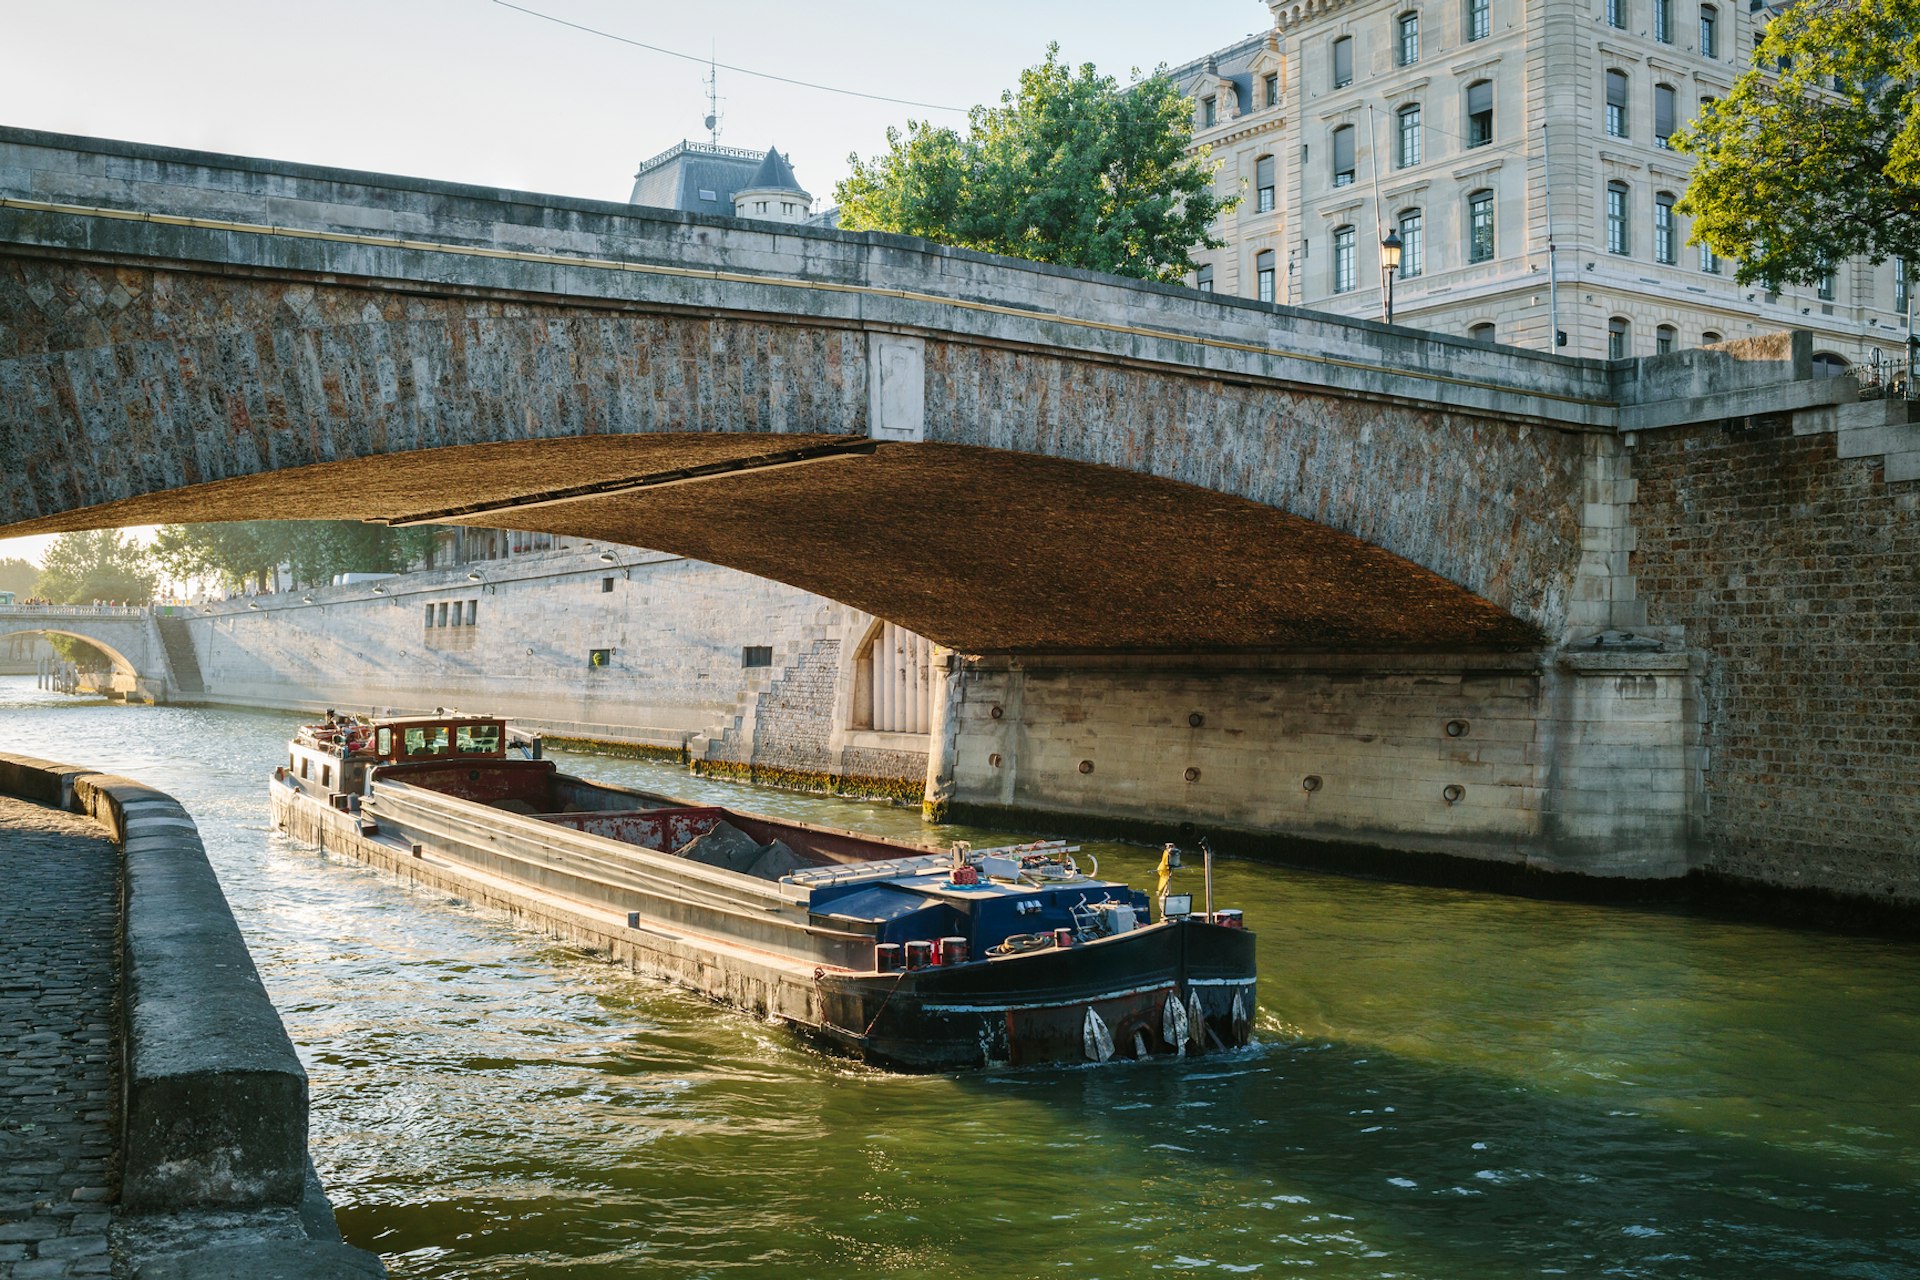 The Petit Pont over the Seine river and a barge in Paris, France